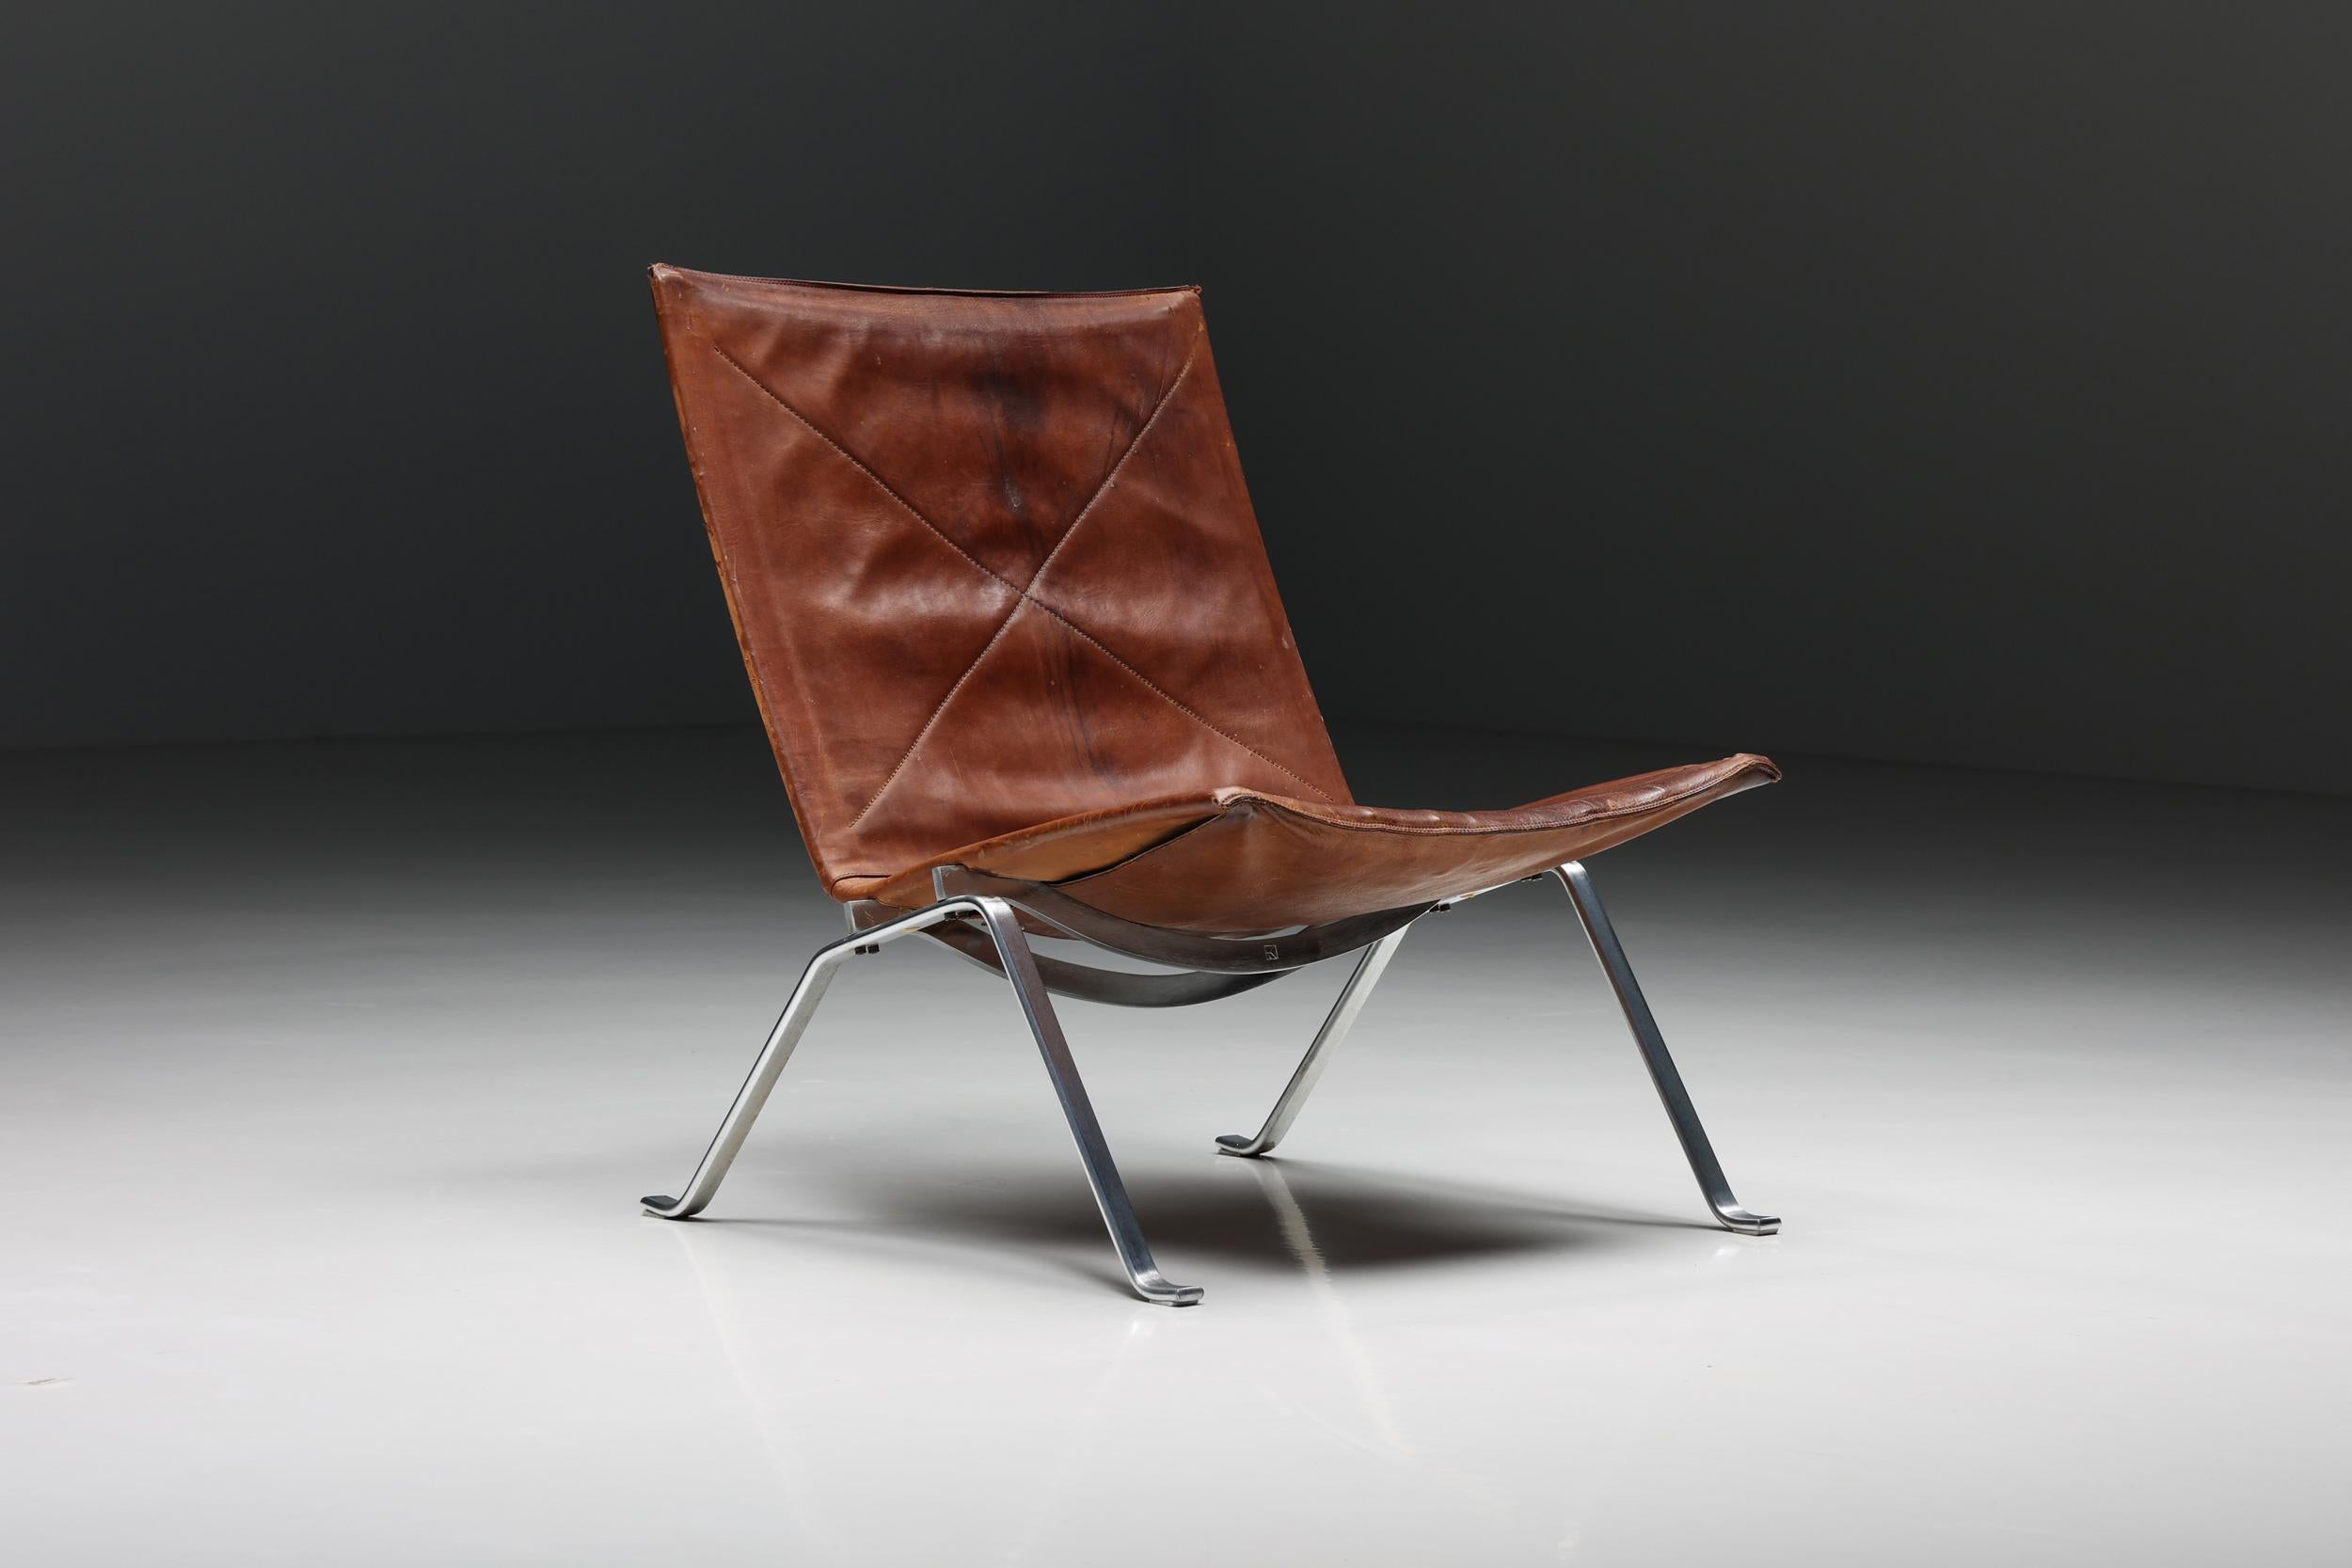 Cognac leather PK 22 Poul Kjaerholm lounge chair, Scandinavian Modern, 1960's

While his mid-century Danish peers were working with wood, Poul Kjærholm (1929–80) found inspiration in the structural potential of steel. His innovative PK22 chair,